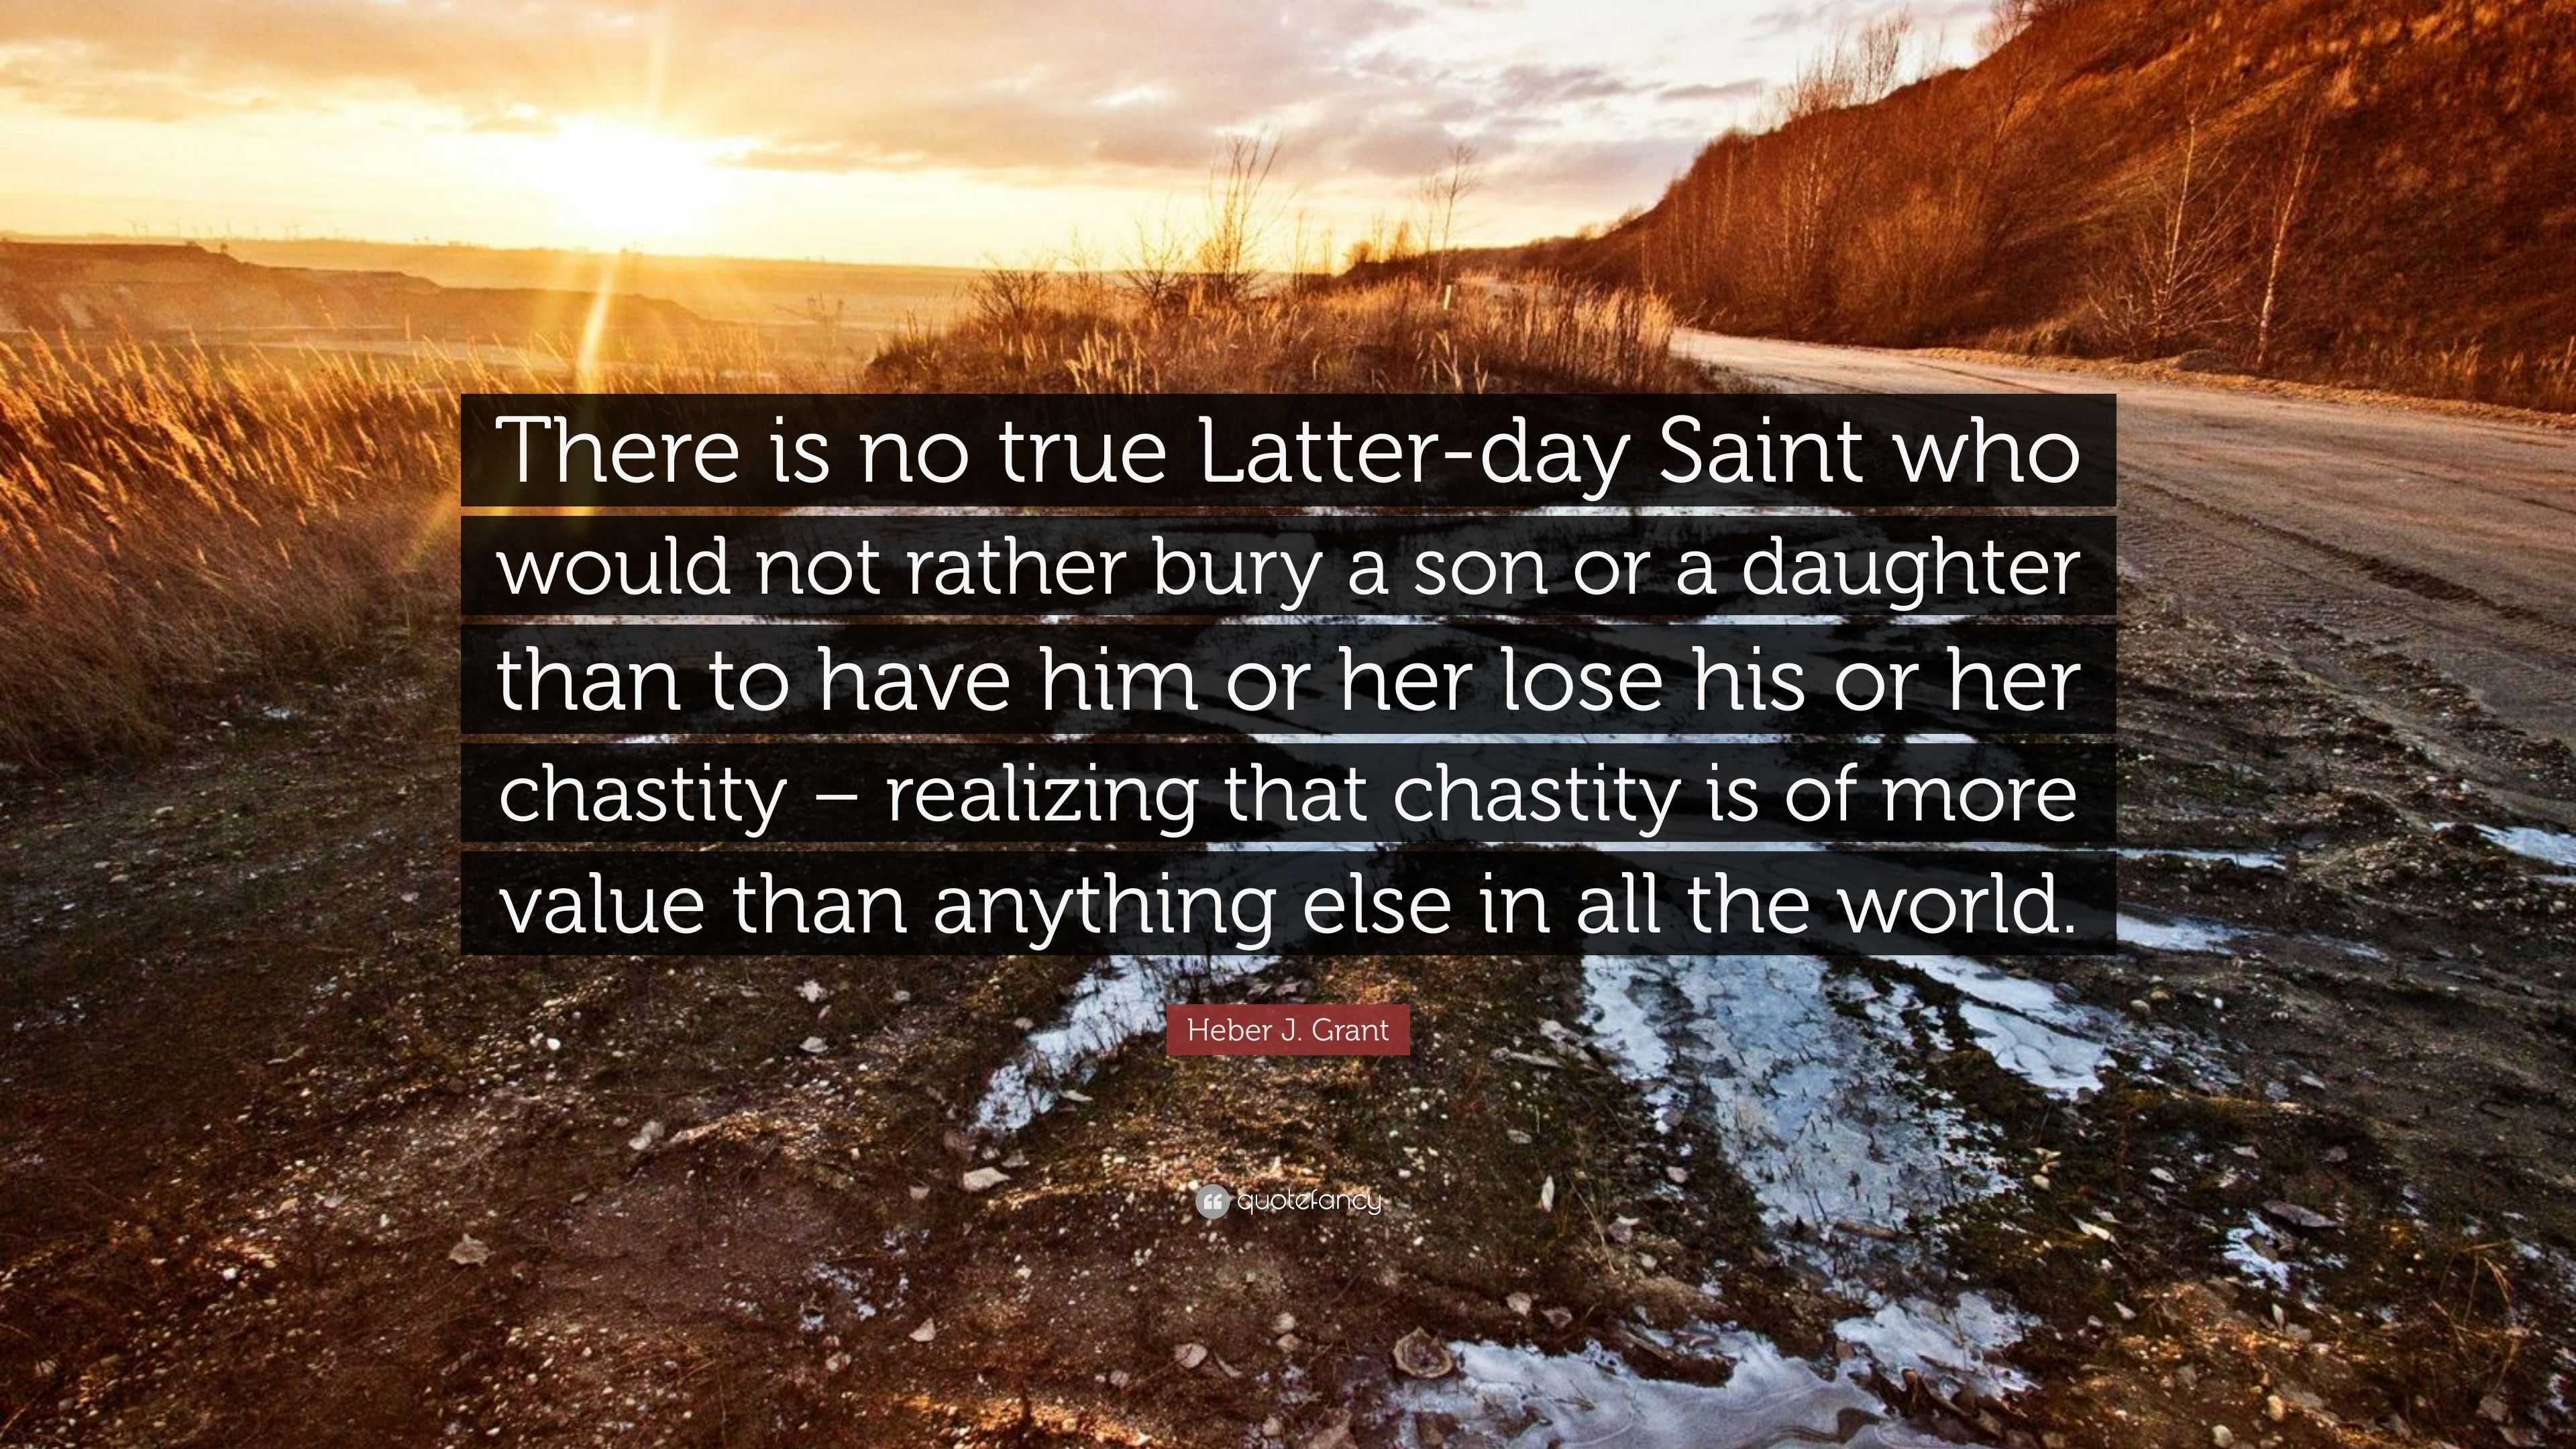 The more you understand your true identity - Latter-day Saint